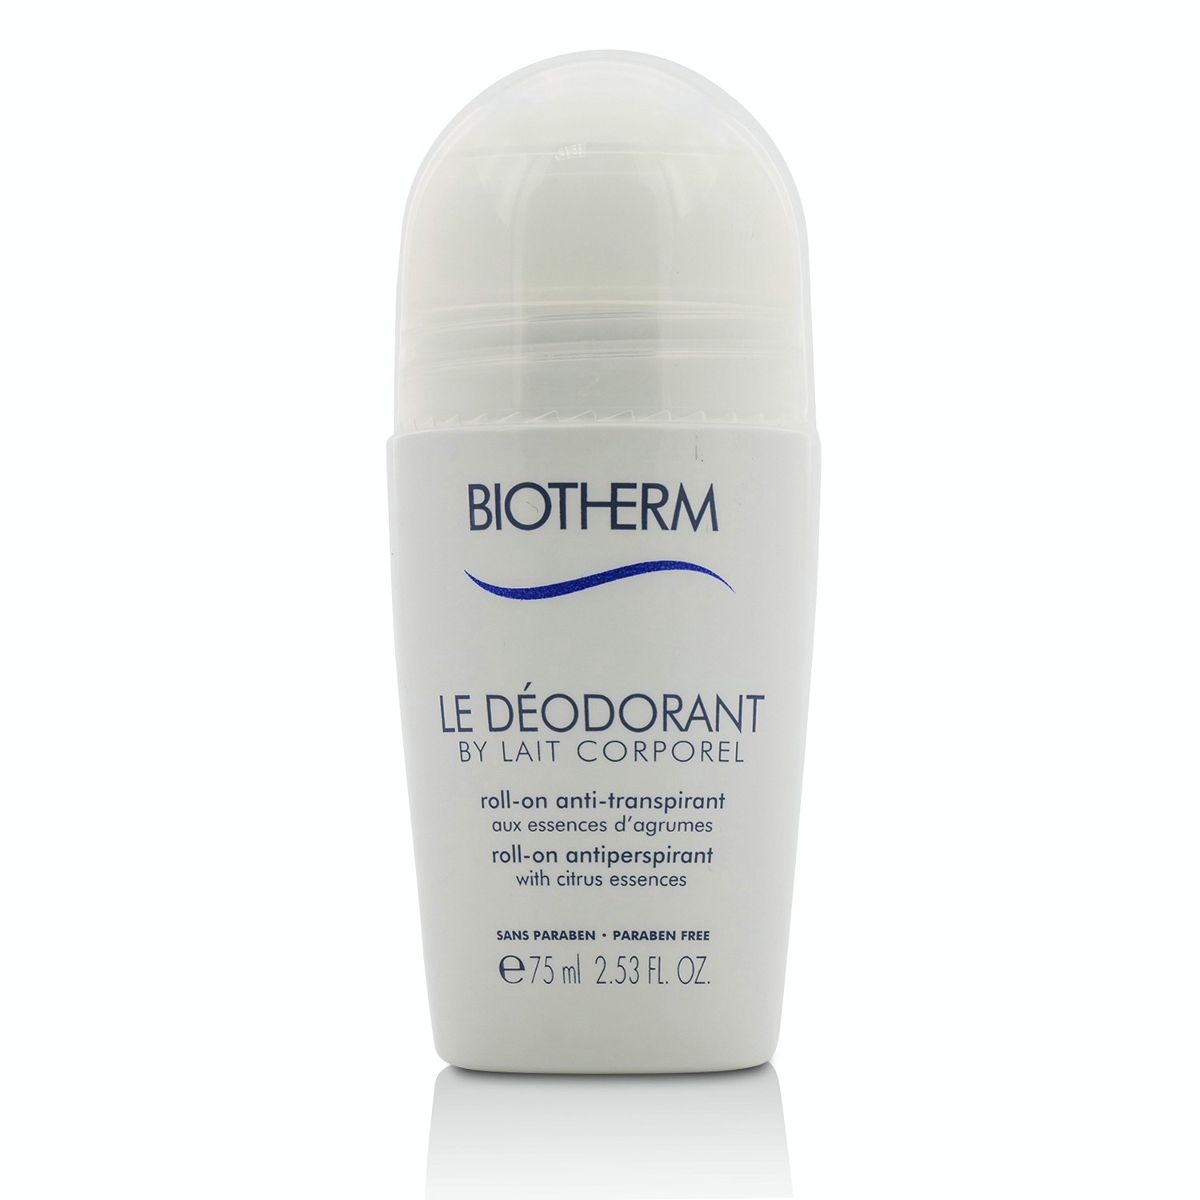 Le Deodorant By Lait Corporel Roll-On Antiperspirant Biotherm Image